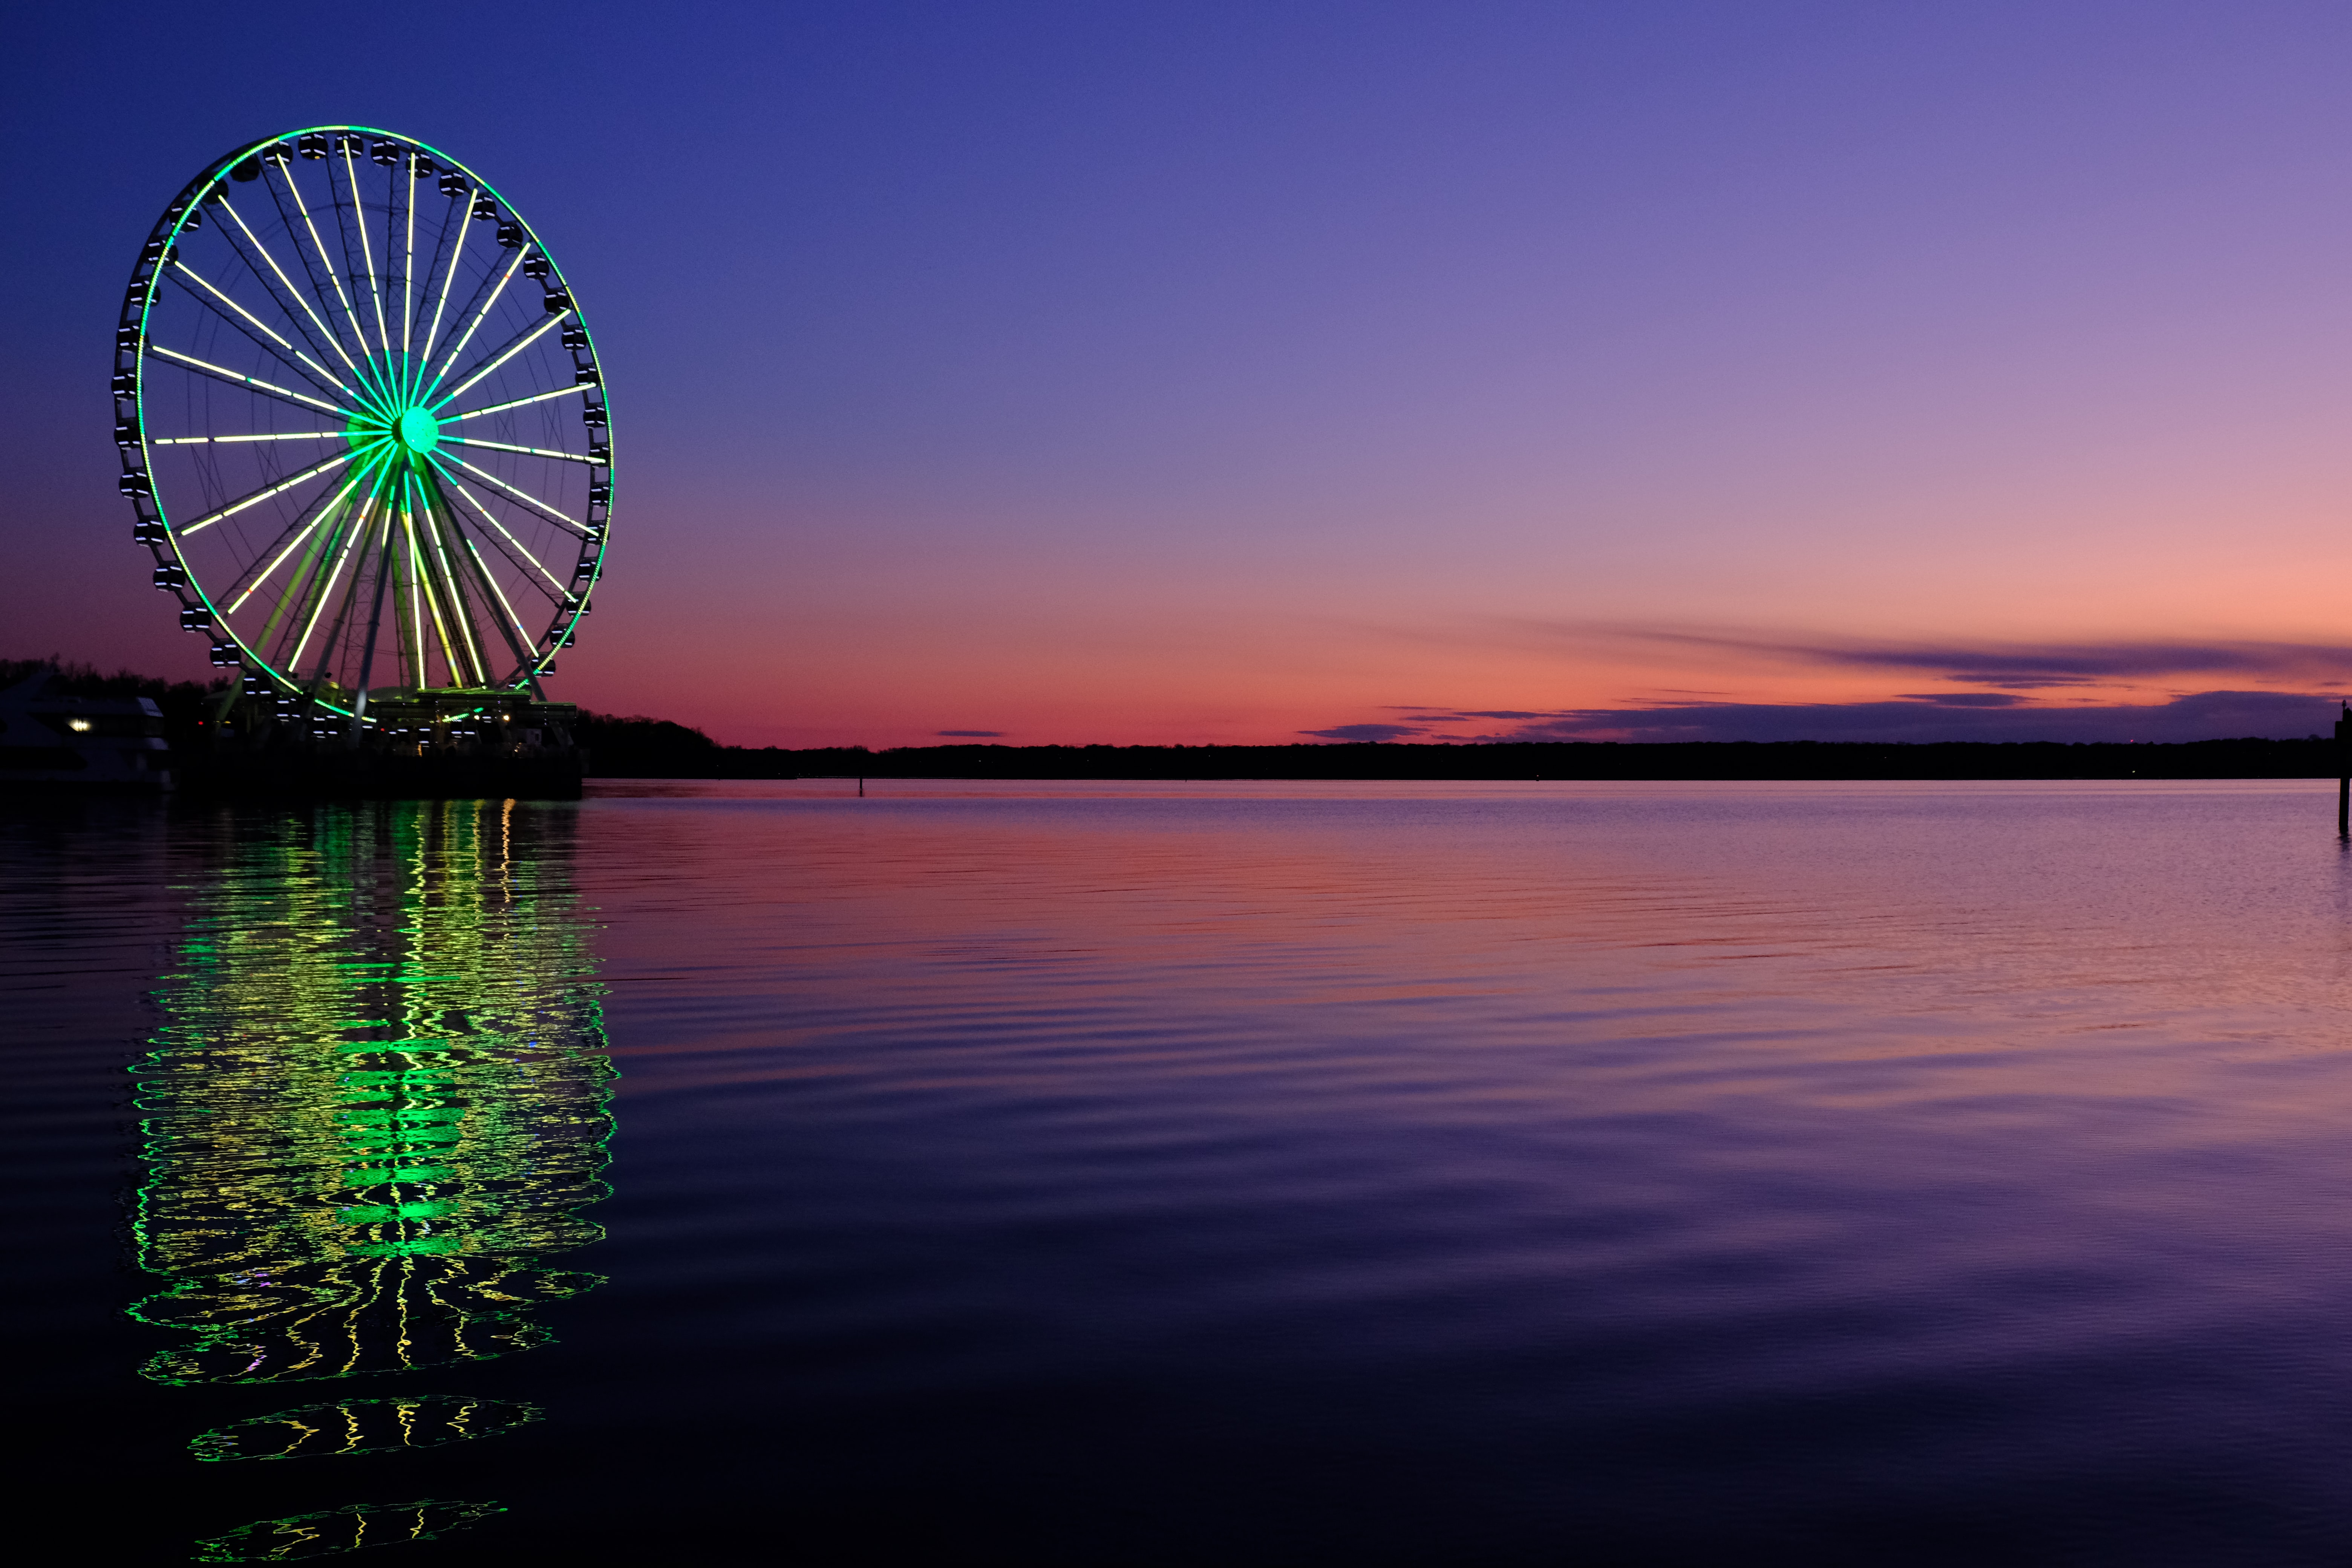 2022 Realtors Legislative Meetings and Expo from May 1 to May 6 in National Harbor, Maryland